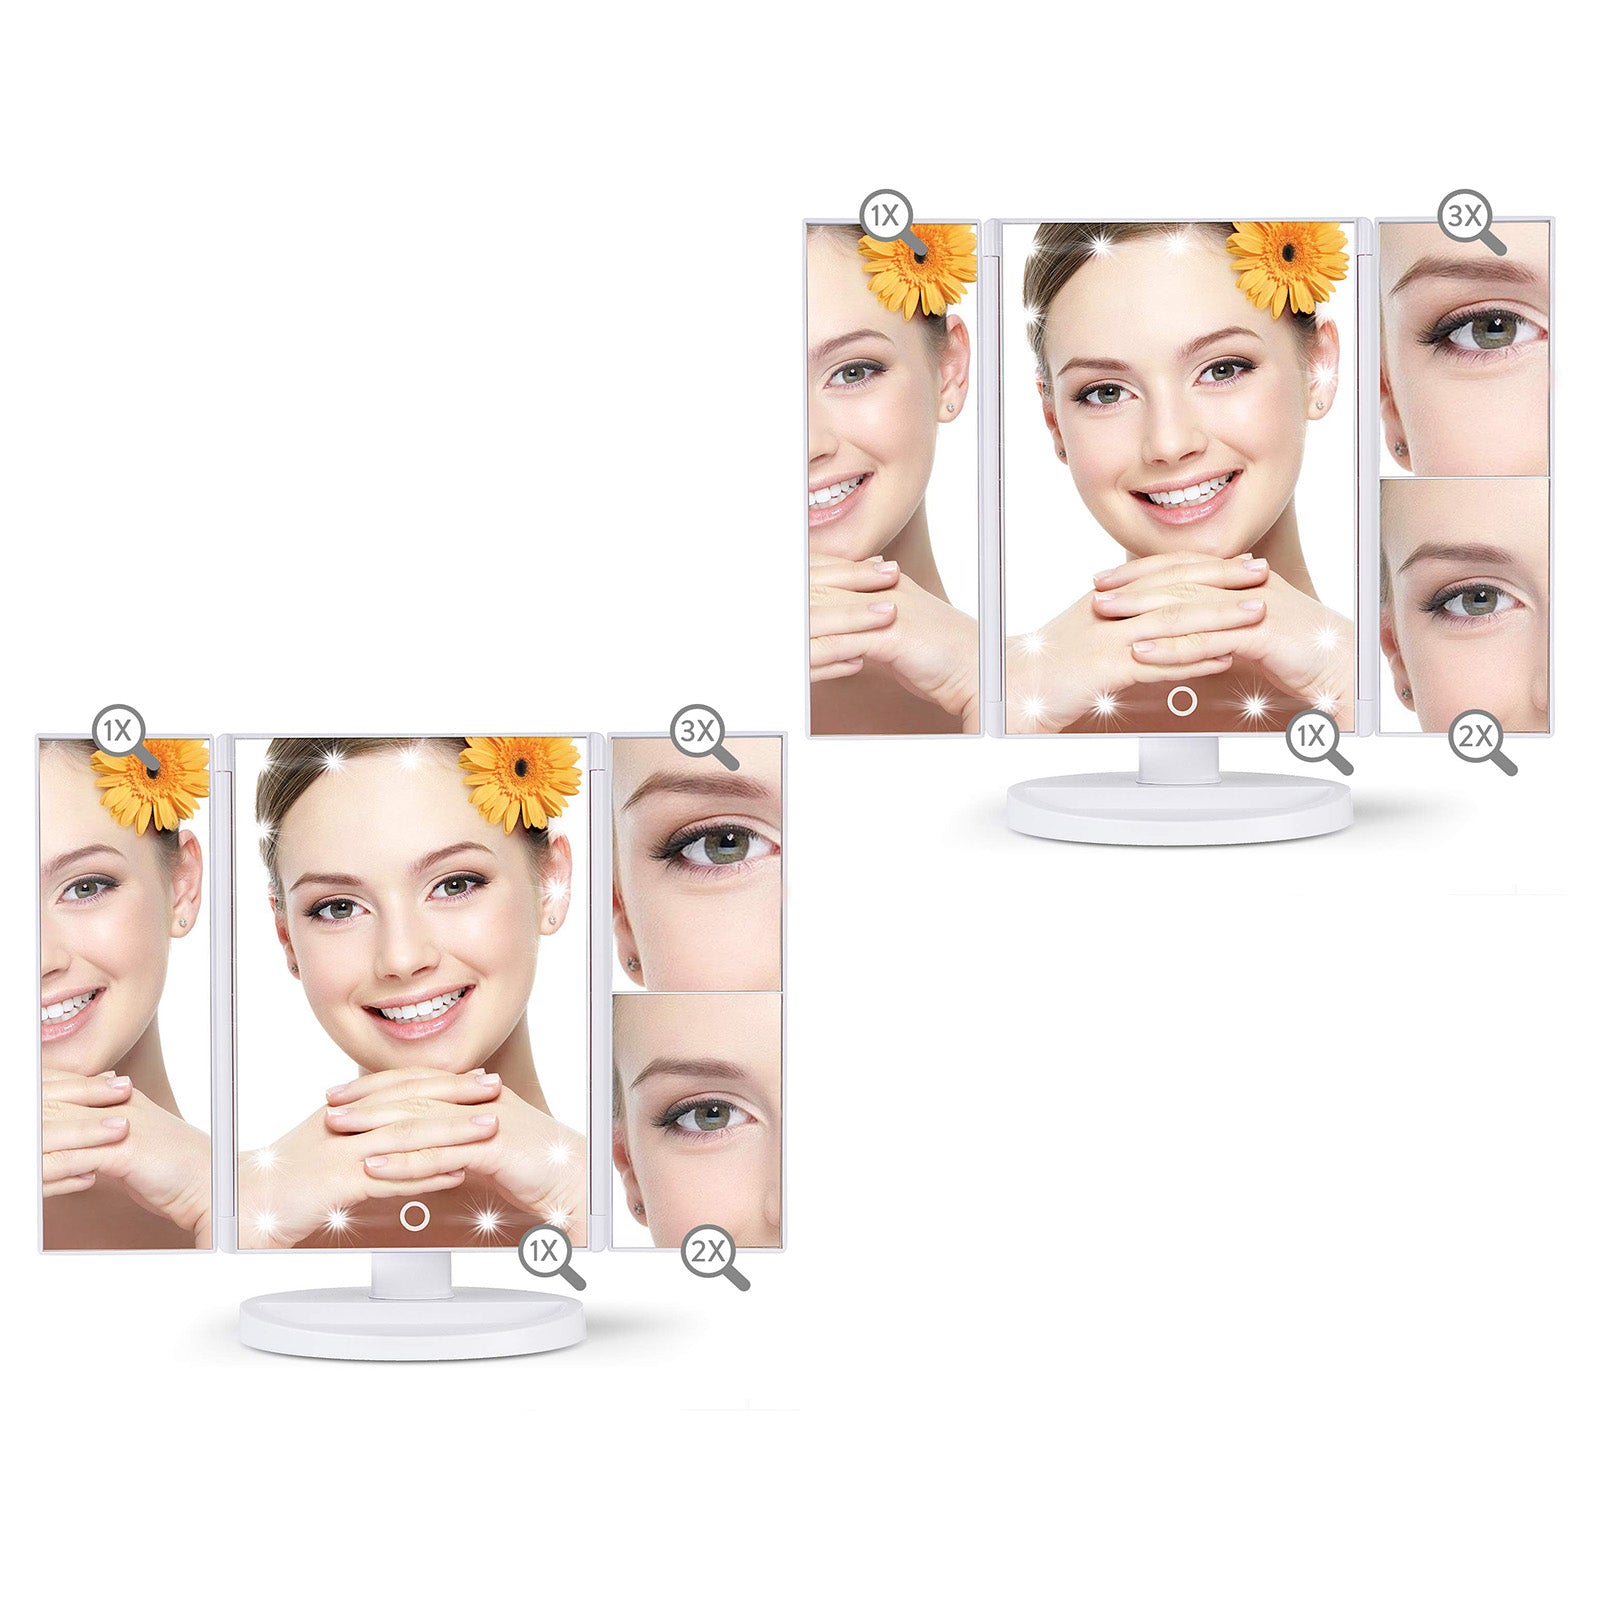 WonderWorker Amaze Trifold LED Lighted Makeup Mirror with 21 Led Lights, Adjustable Cosmetic Vanity Mirror 1x, 2X, 3X Magnification, 2 Pack